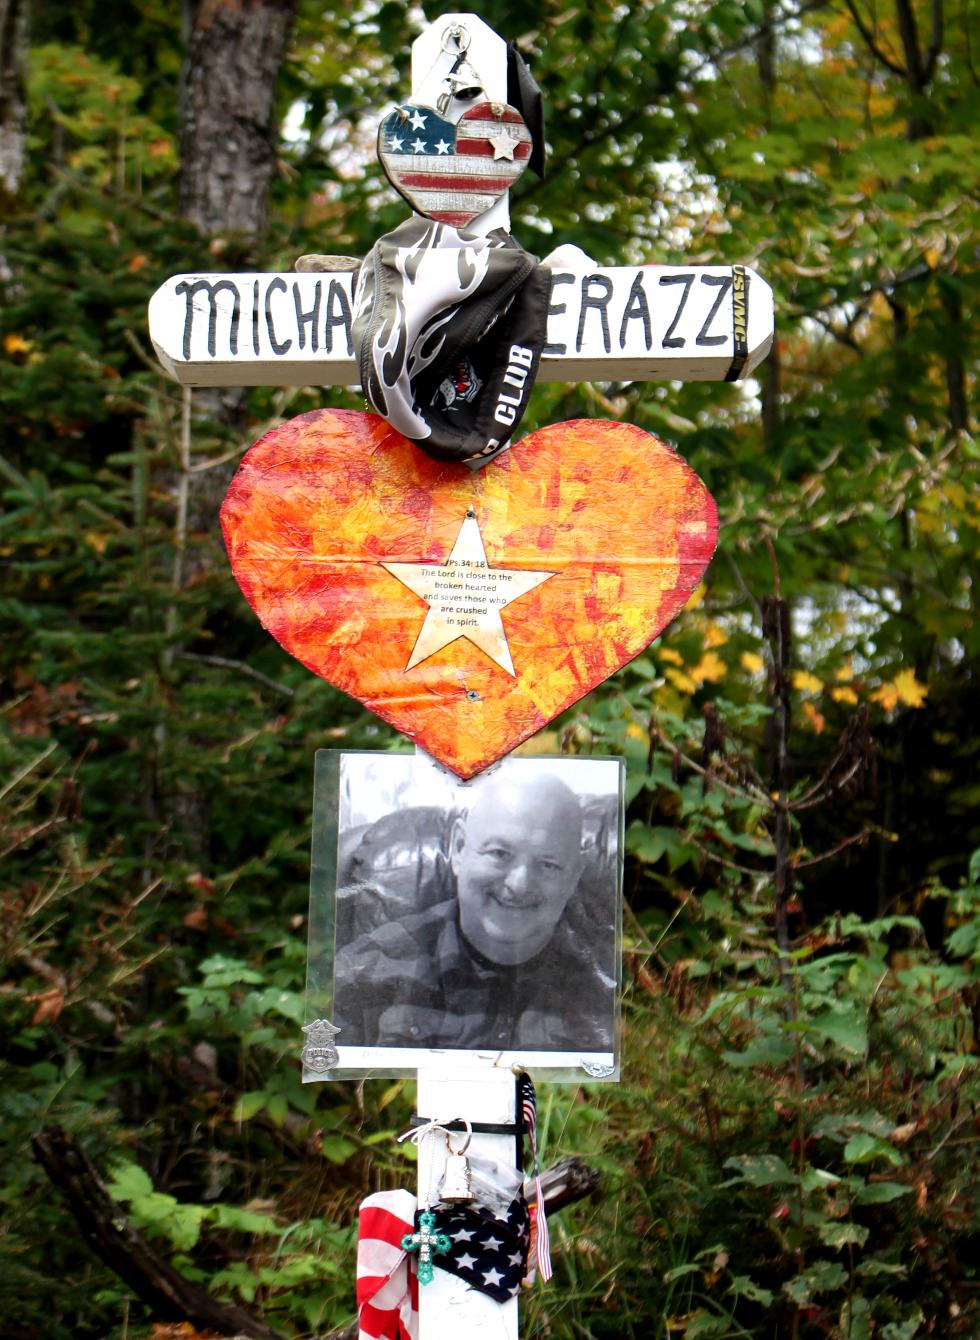 Michael Ferazzi lost in Randolph NH Motorcycle Accident